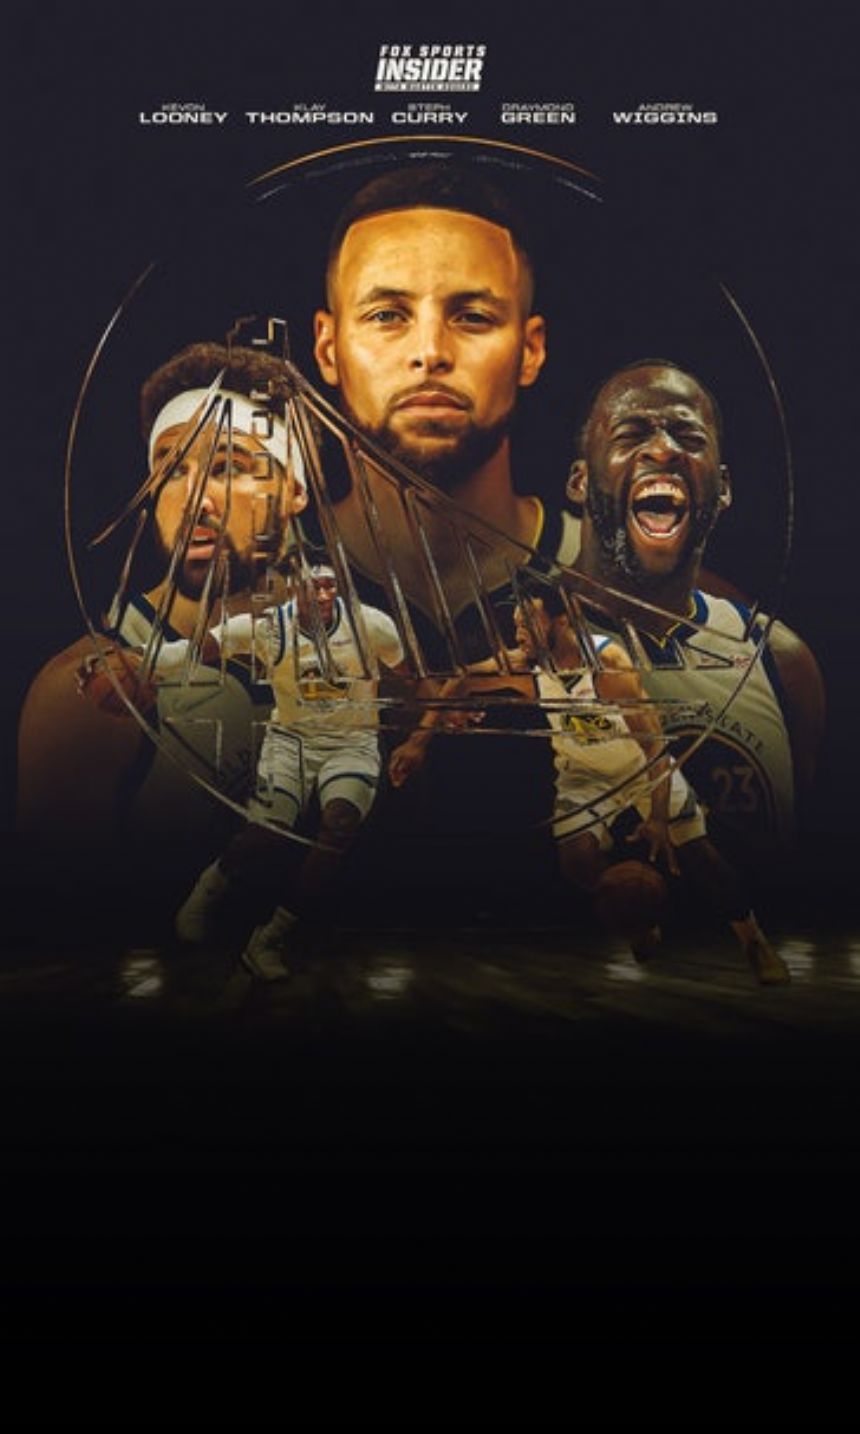 Steph Curry and the Golden State Warriors are out for blood